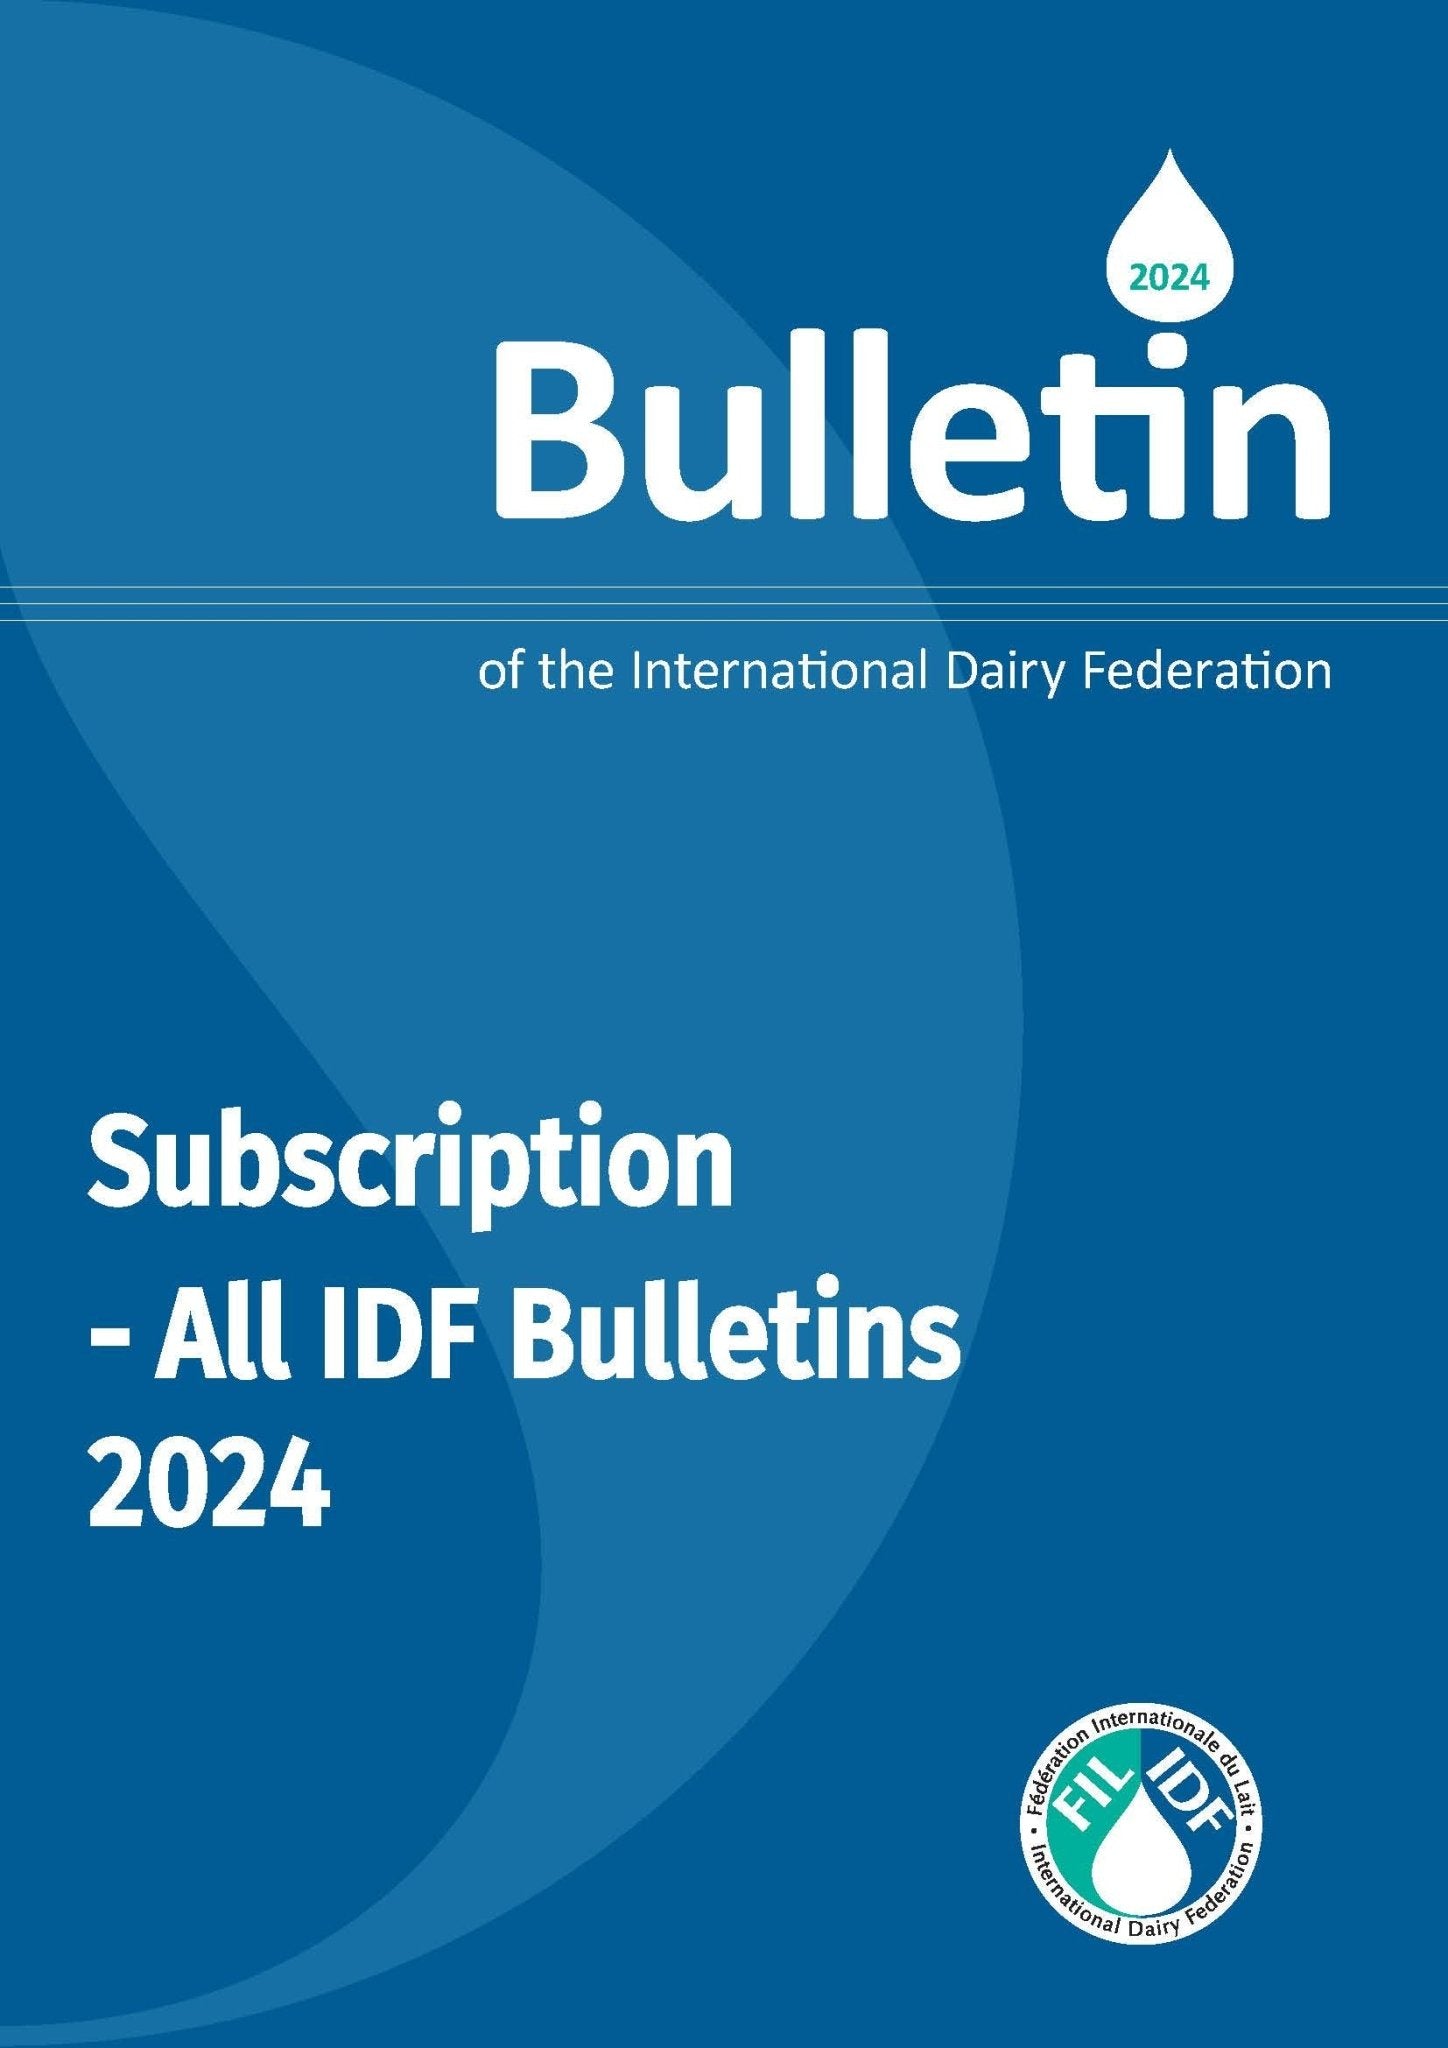 Subscription to all the Bulletins of the IDF 2024 - FIL-IDF